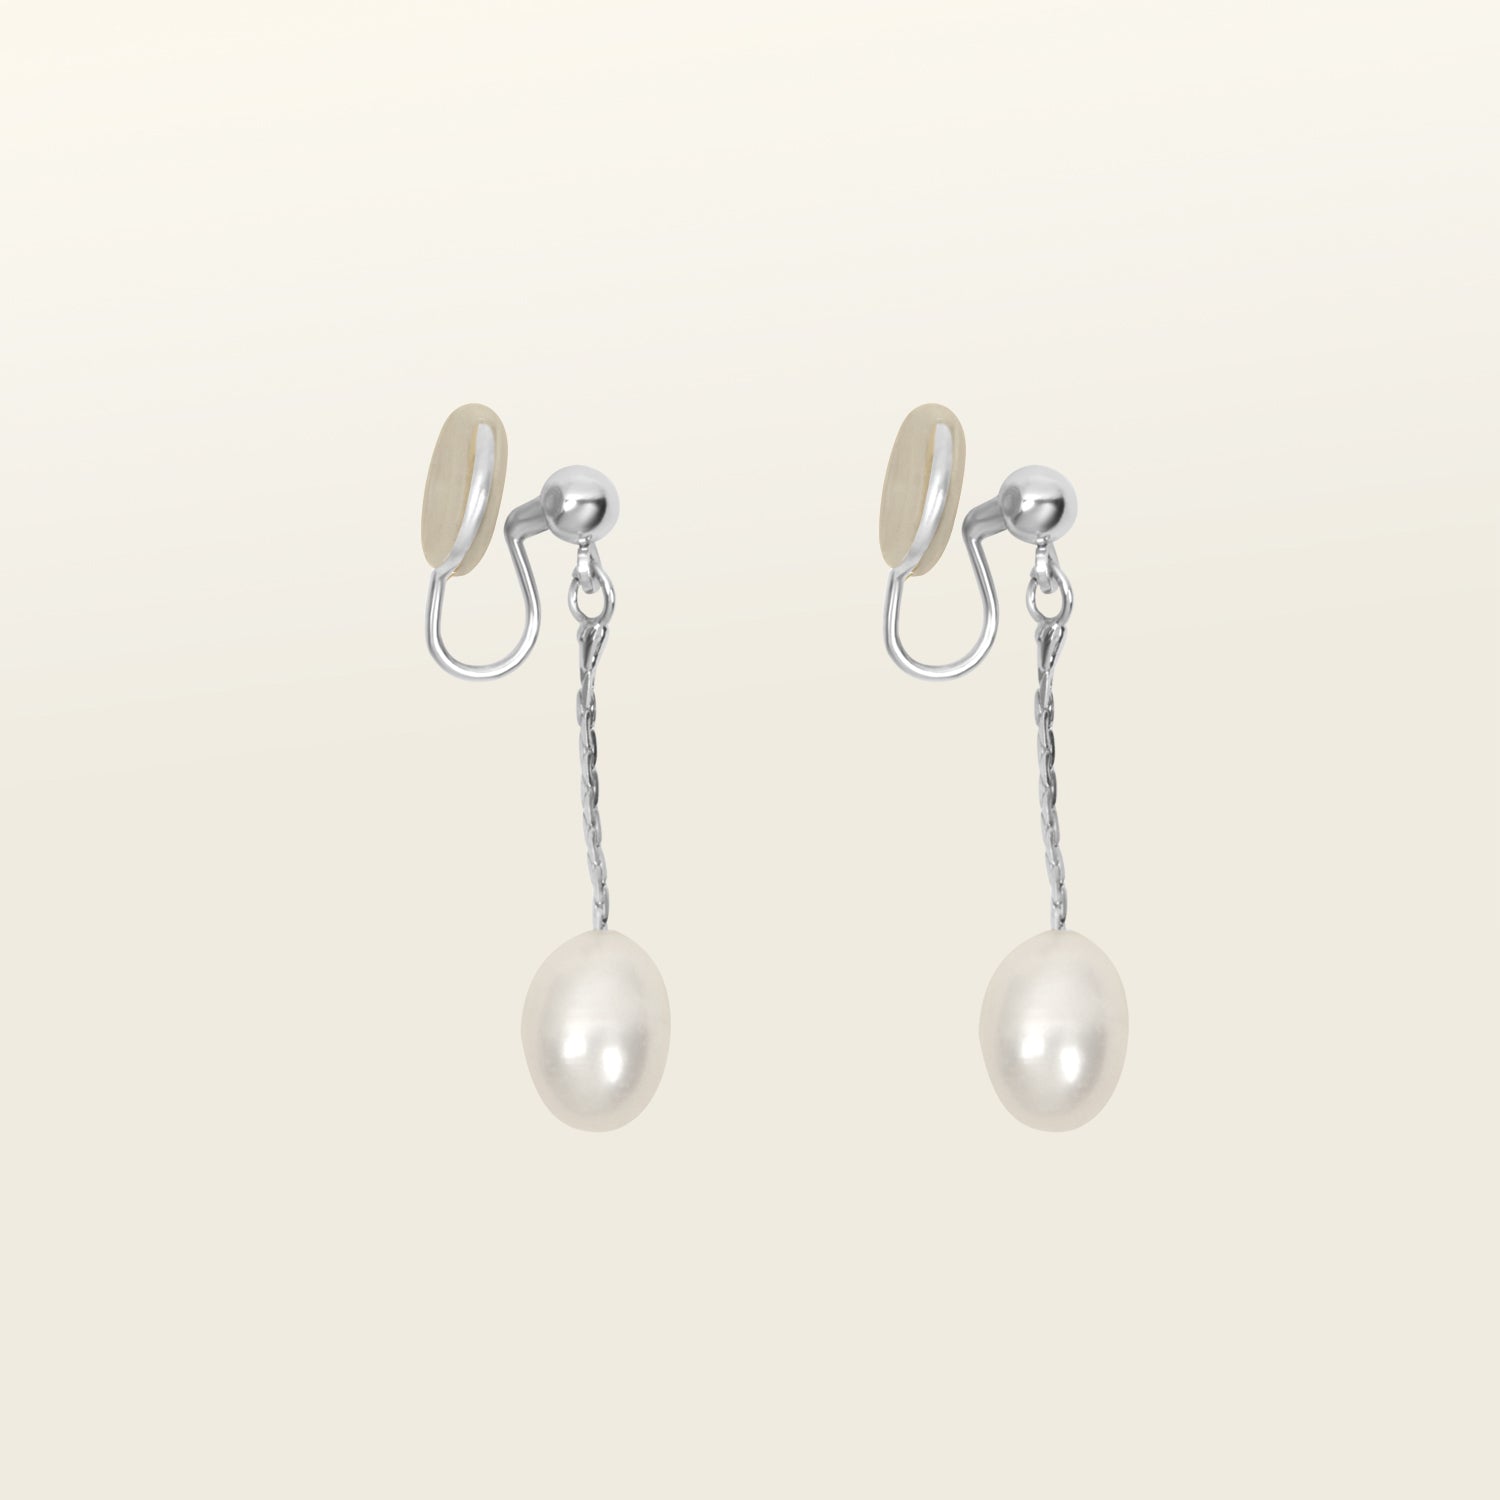 Silver-plated brass mosquito coil clip-on earrings adorned with lustrous freshwater pearls. Suitable for all ear types, offering a medium secure hold for comfortable 24-hour wear.